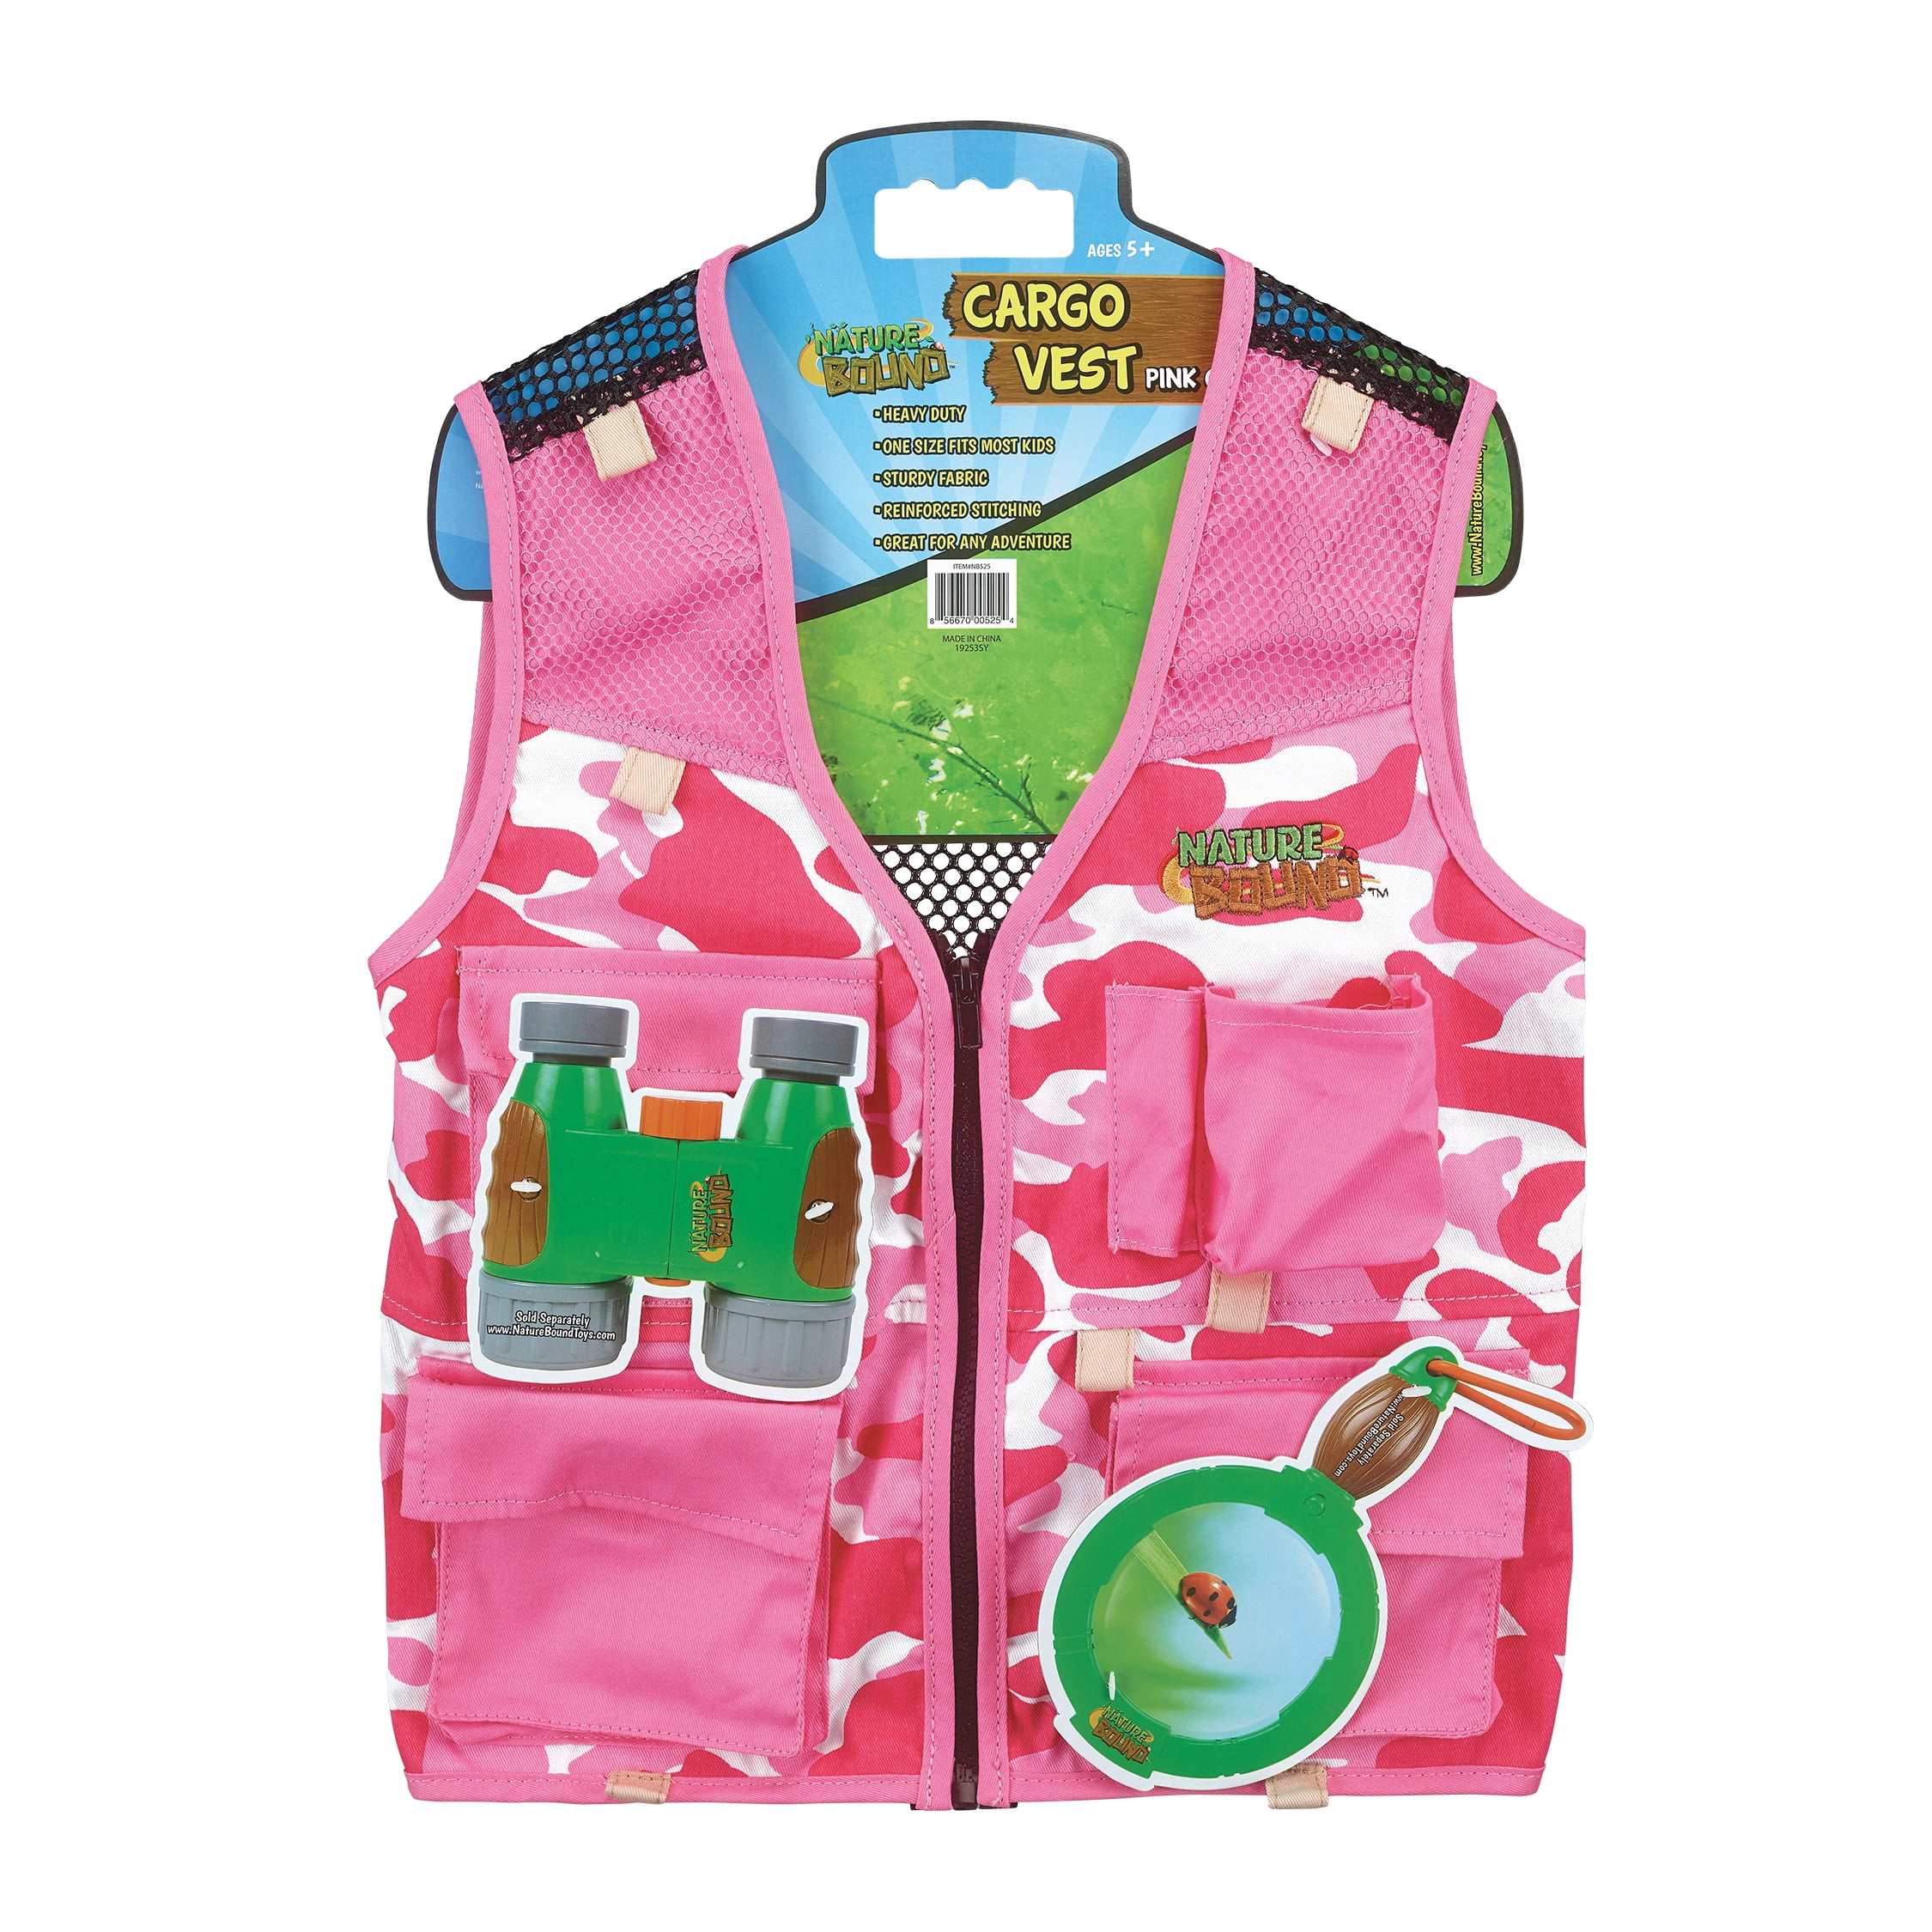 Durable Young Kid's Cargo Vest and Hat w/ 4 Pockets Explorer Safari Costume 